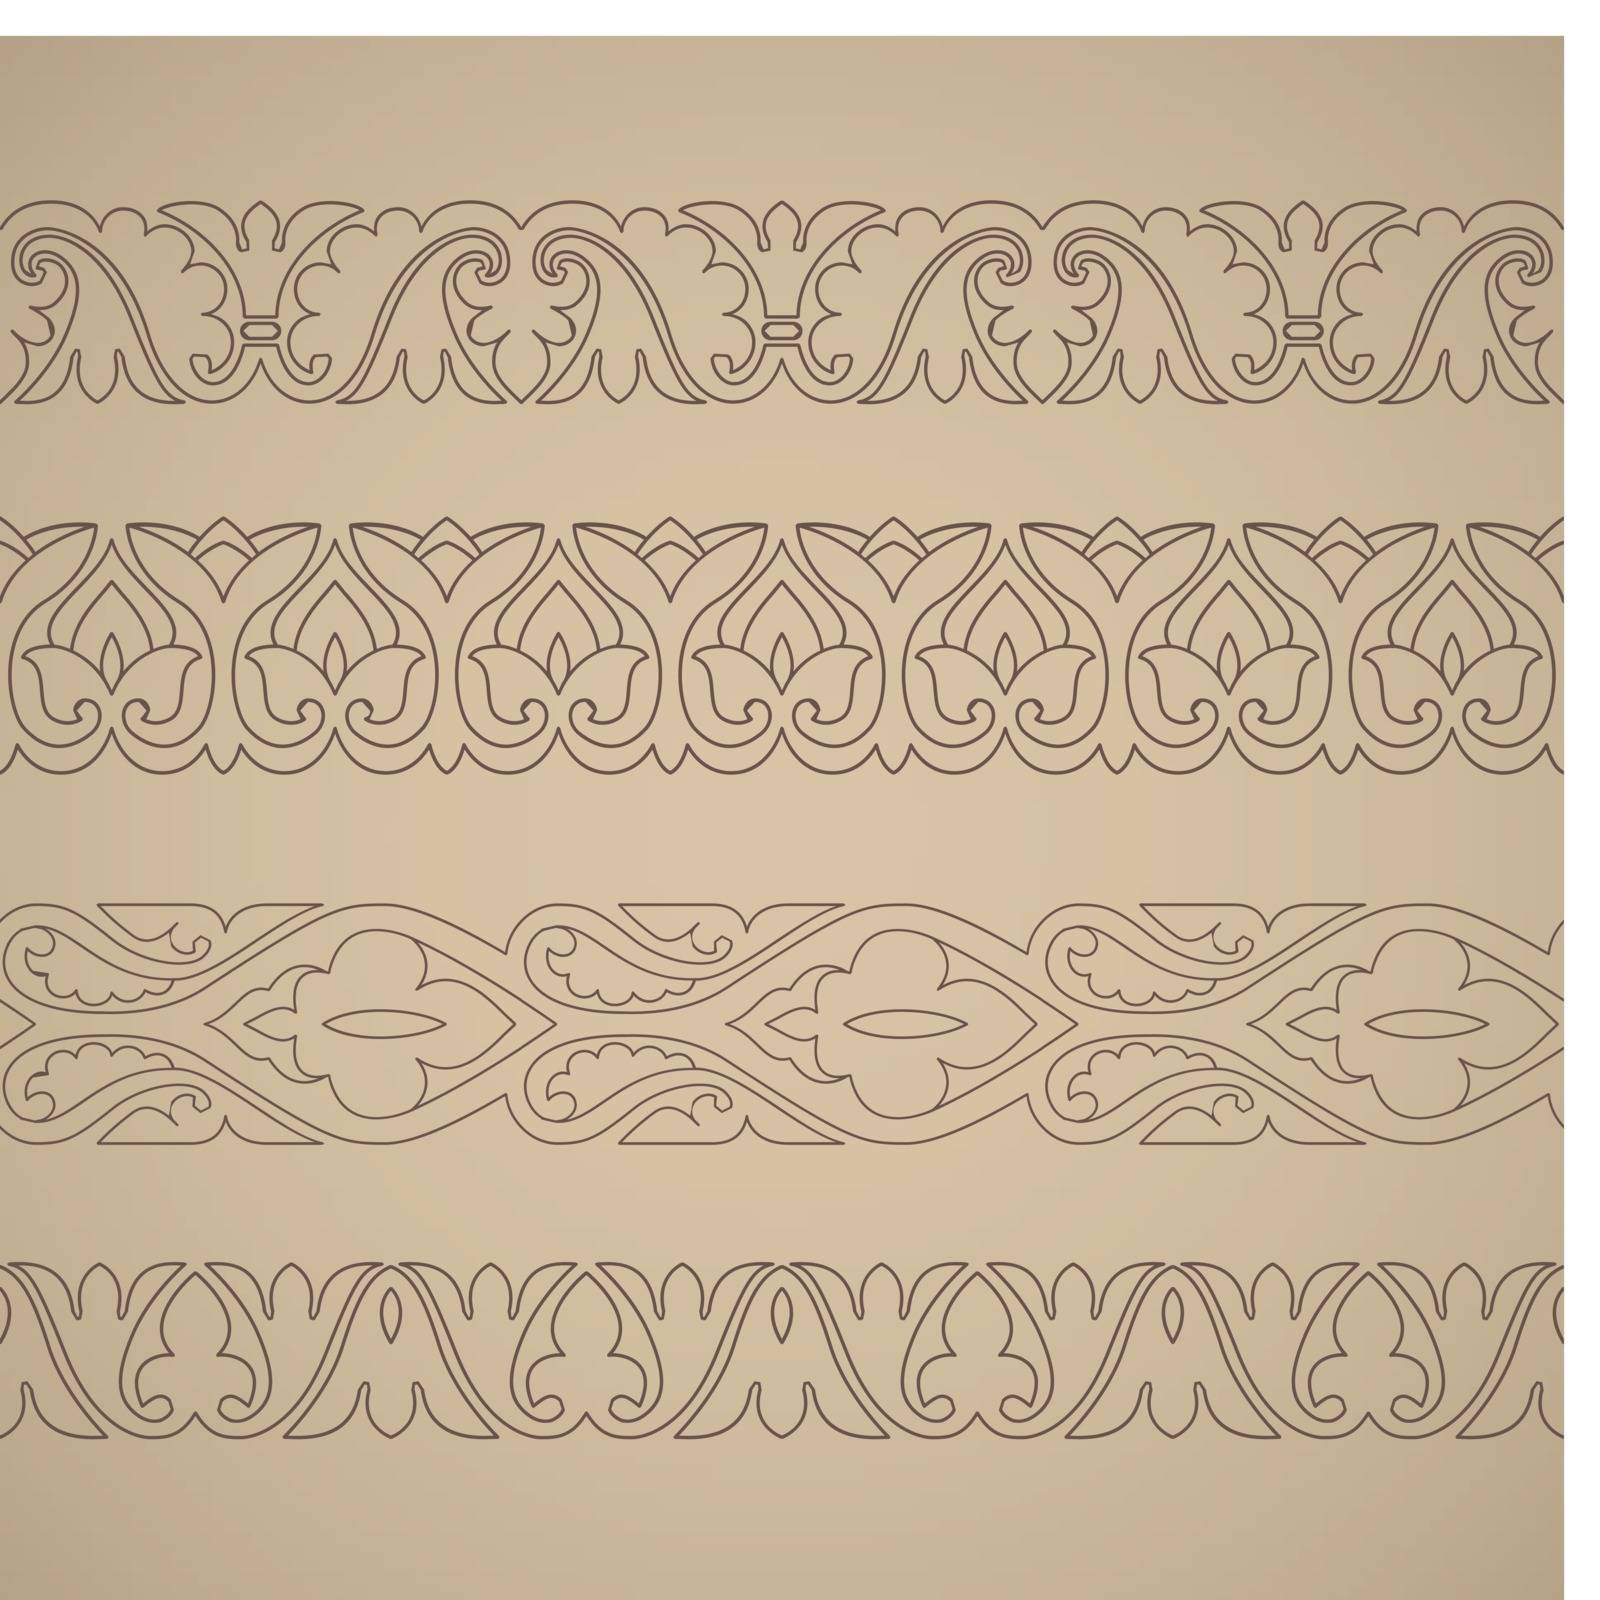 Seamless floral tiling borders. Inspired by old ottoman and arabian ornaments